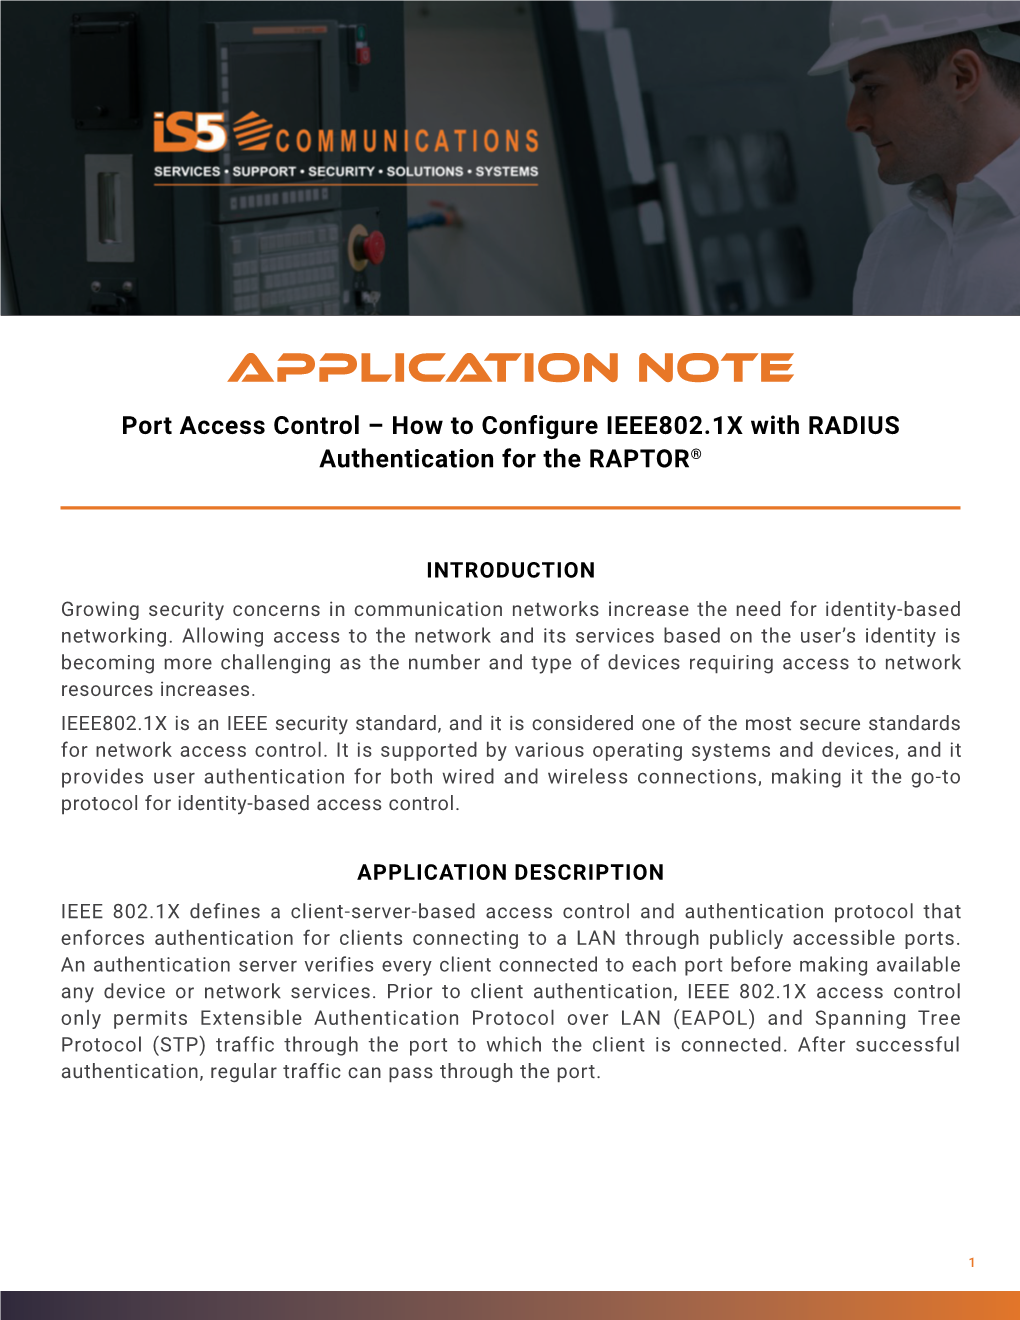 APPLICATION NOTE Port Access Control – How to Configure IEEE802.1X with RADIUS Authentication for the RAPTOR®